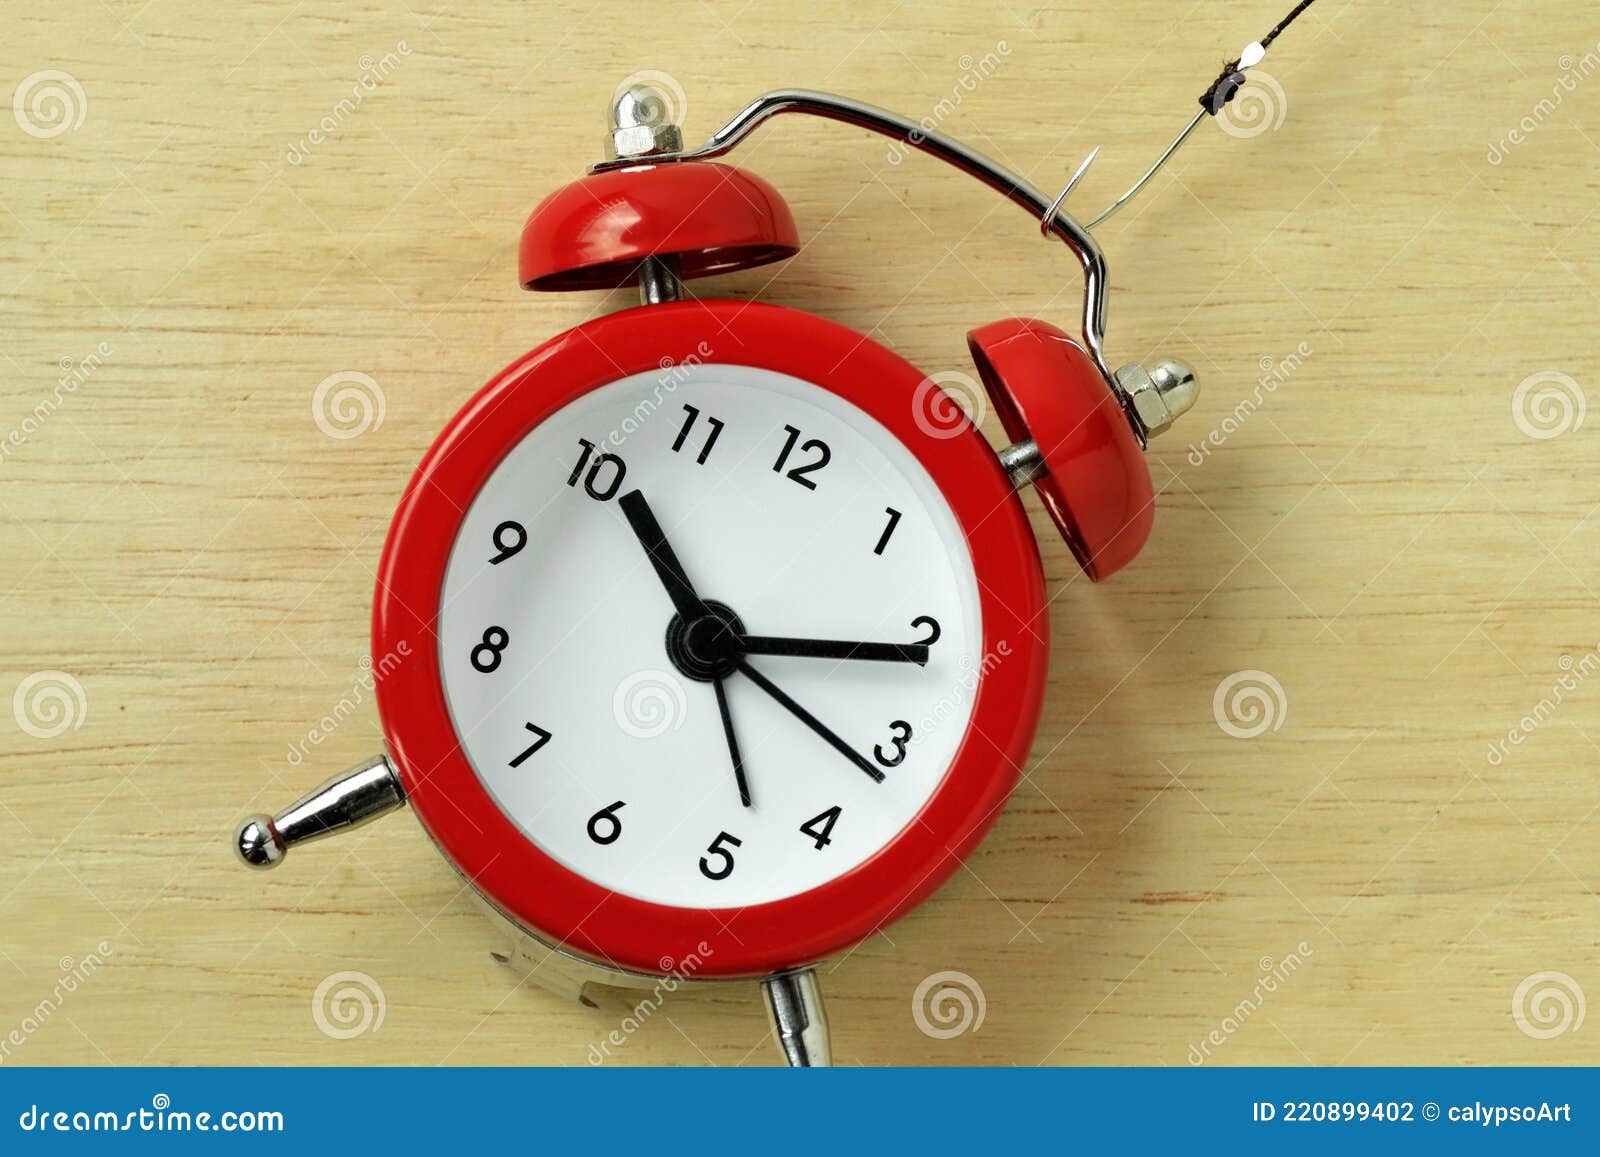 Red Alarm Clock with Fishing Hook - Concept of Stealing Time Stock